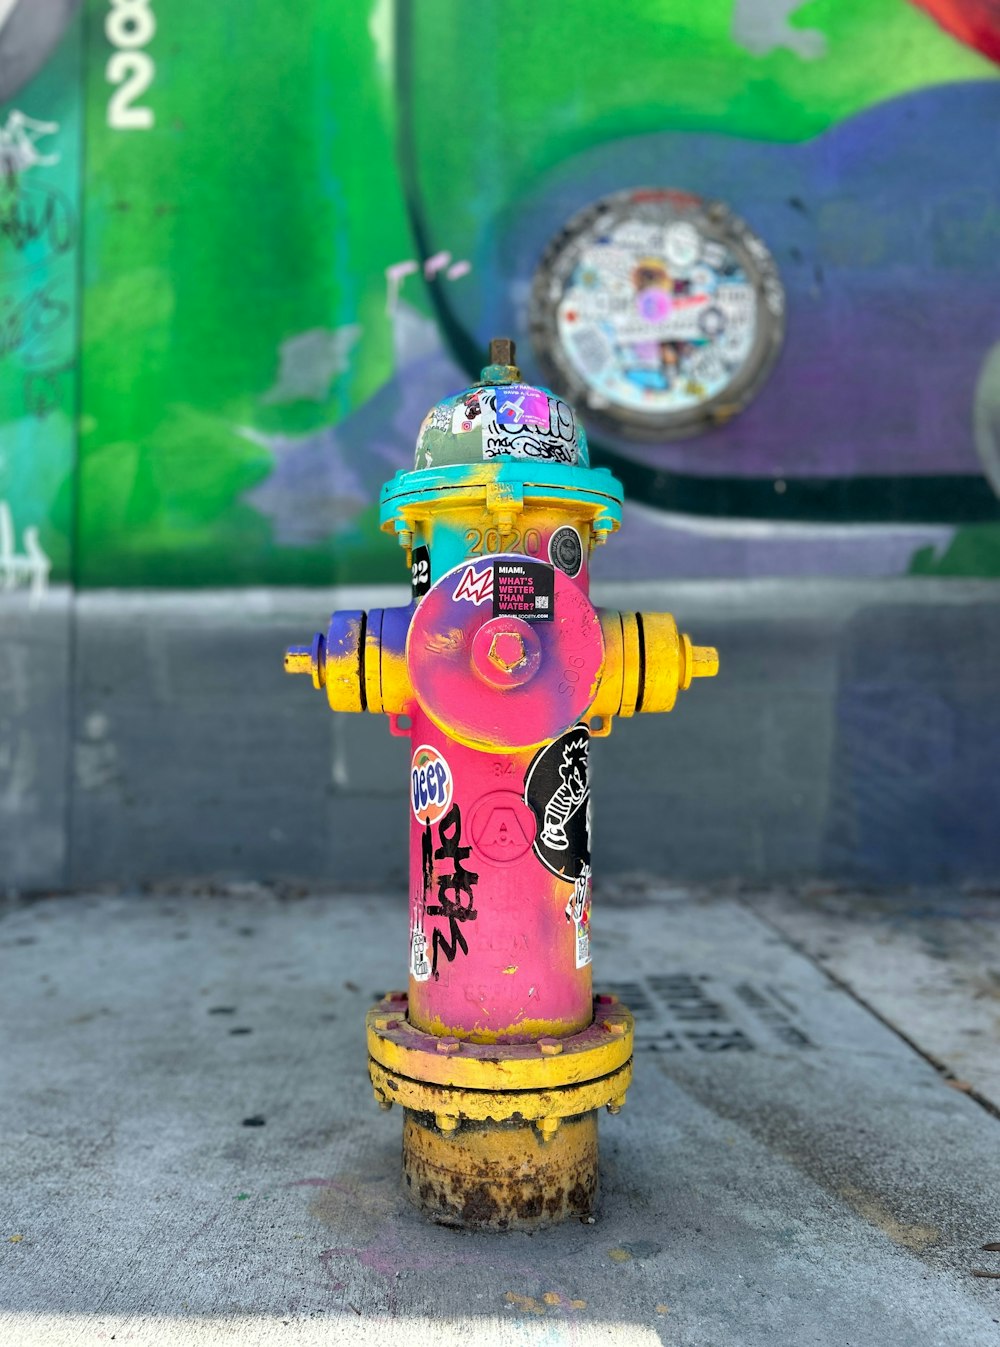 a yellow and pink fire hydrant with graffiti on it